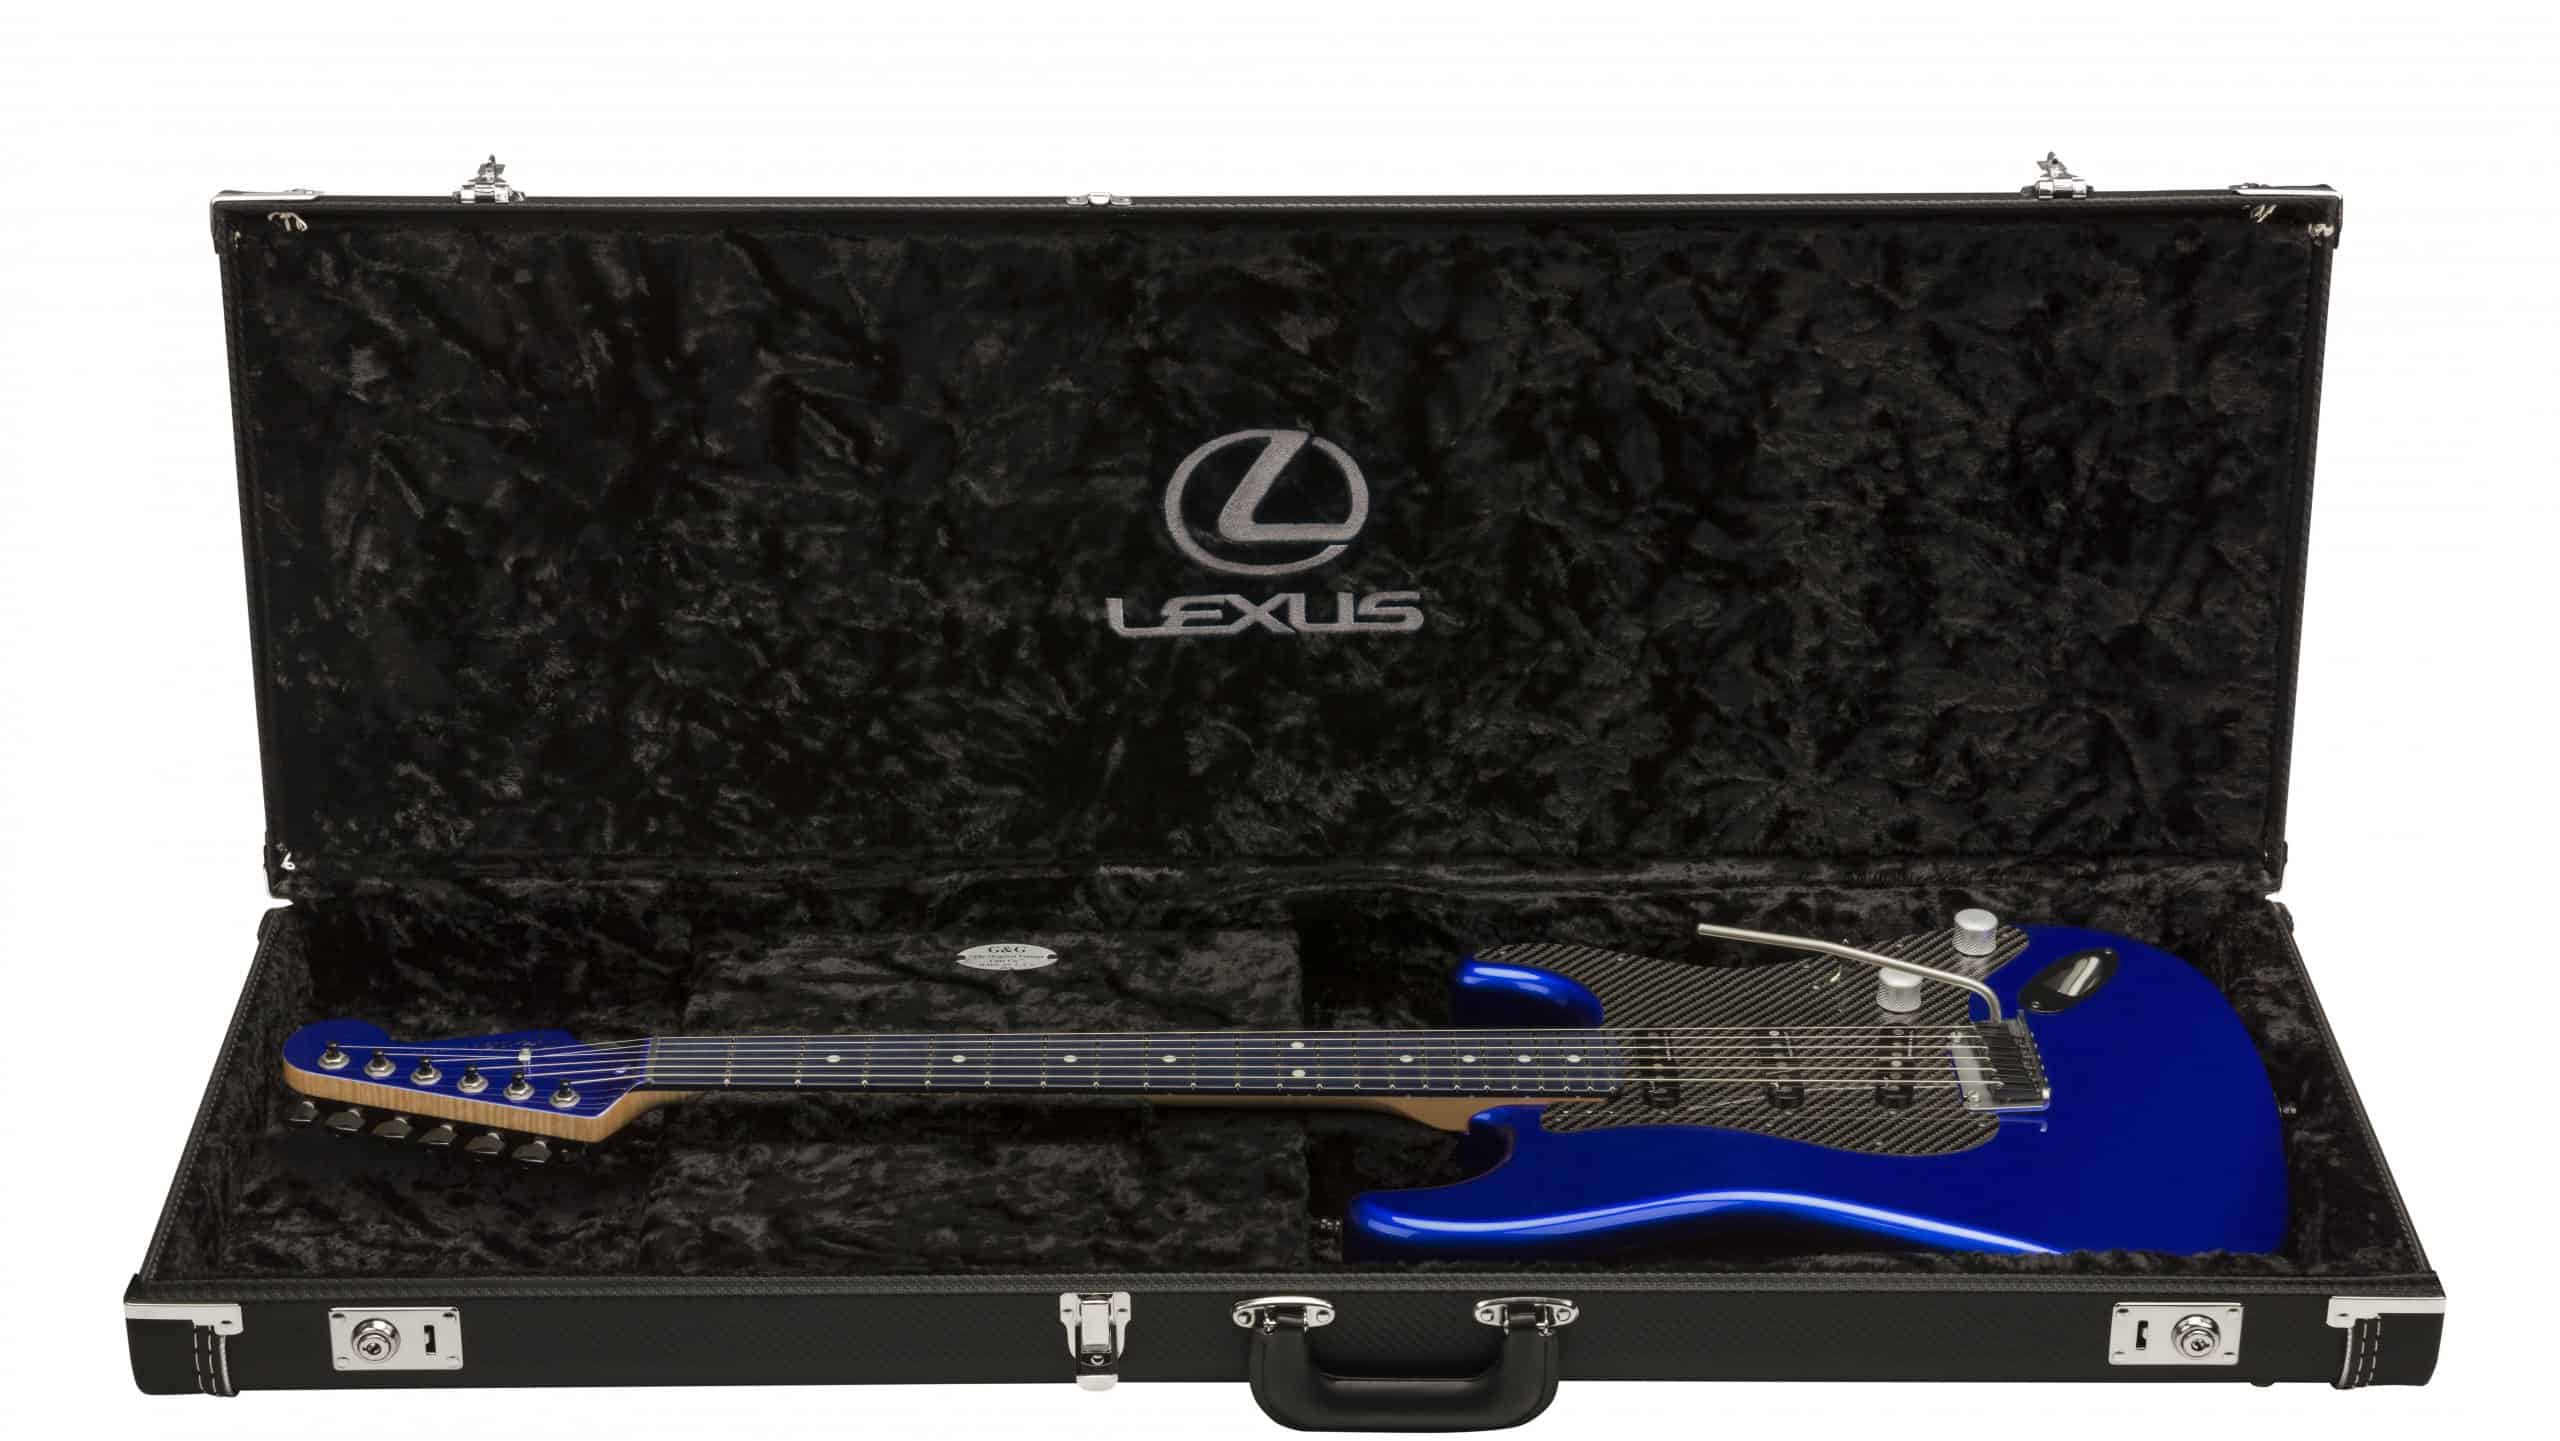 Fender’s Custom Shop, partnered with Lexus, has announced the launch of 100 limited edition Fender Lexus LC Stratocaster guitars built by principal master builder Ron Thorn.